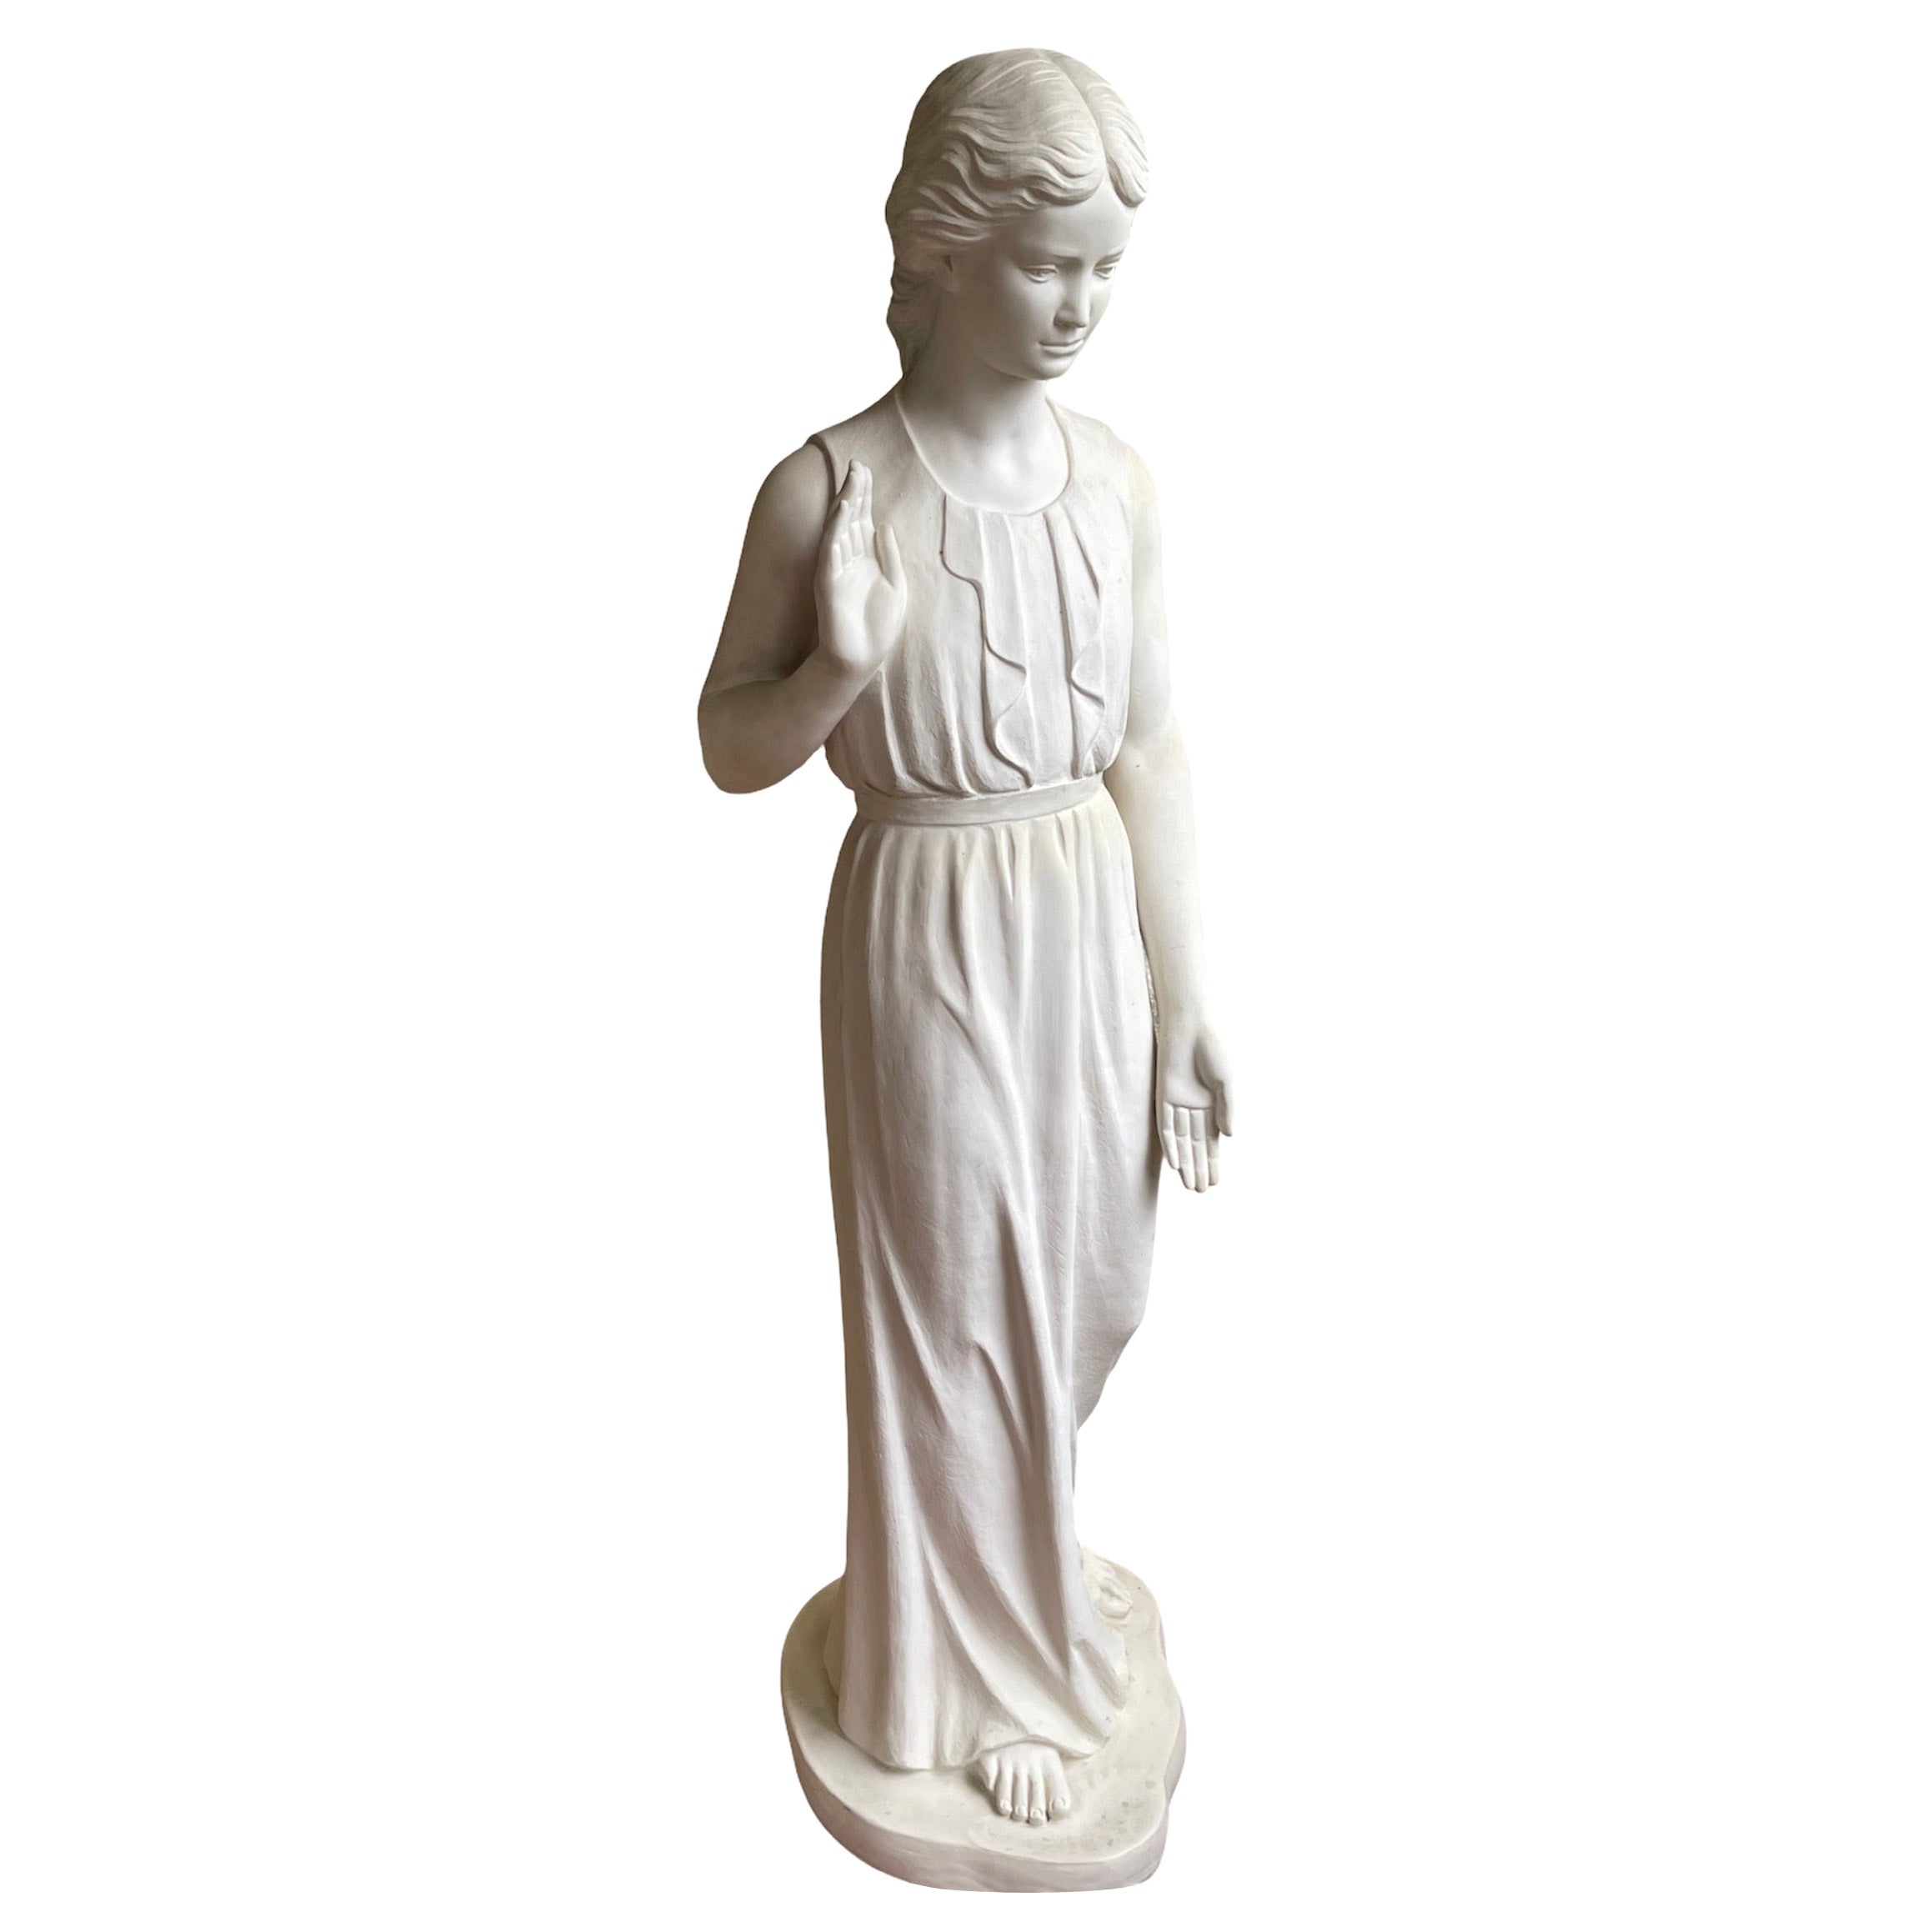 Life Size Bonded or Cold Cast Marble Garden Sculpture of a Young Girl